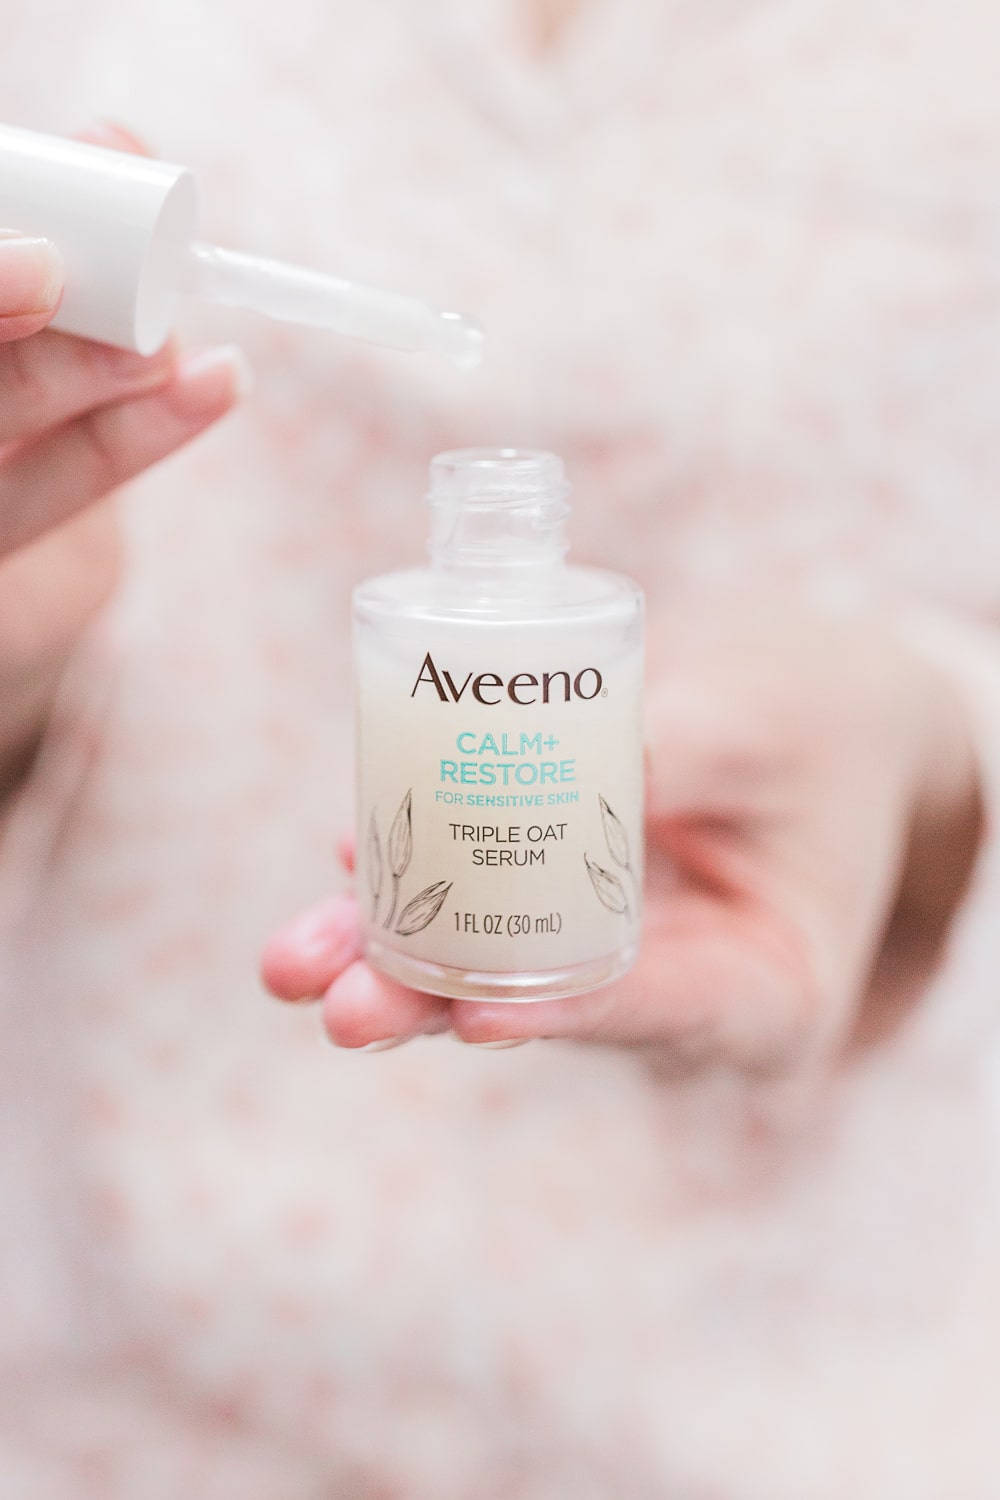 Blogger Stephanie Ziajka share an Aveeno Calm and Restore Triple Oat Serum review on Diary of a Debutante